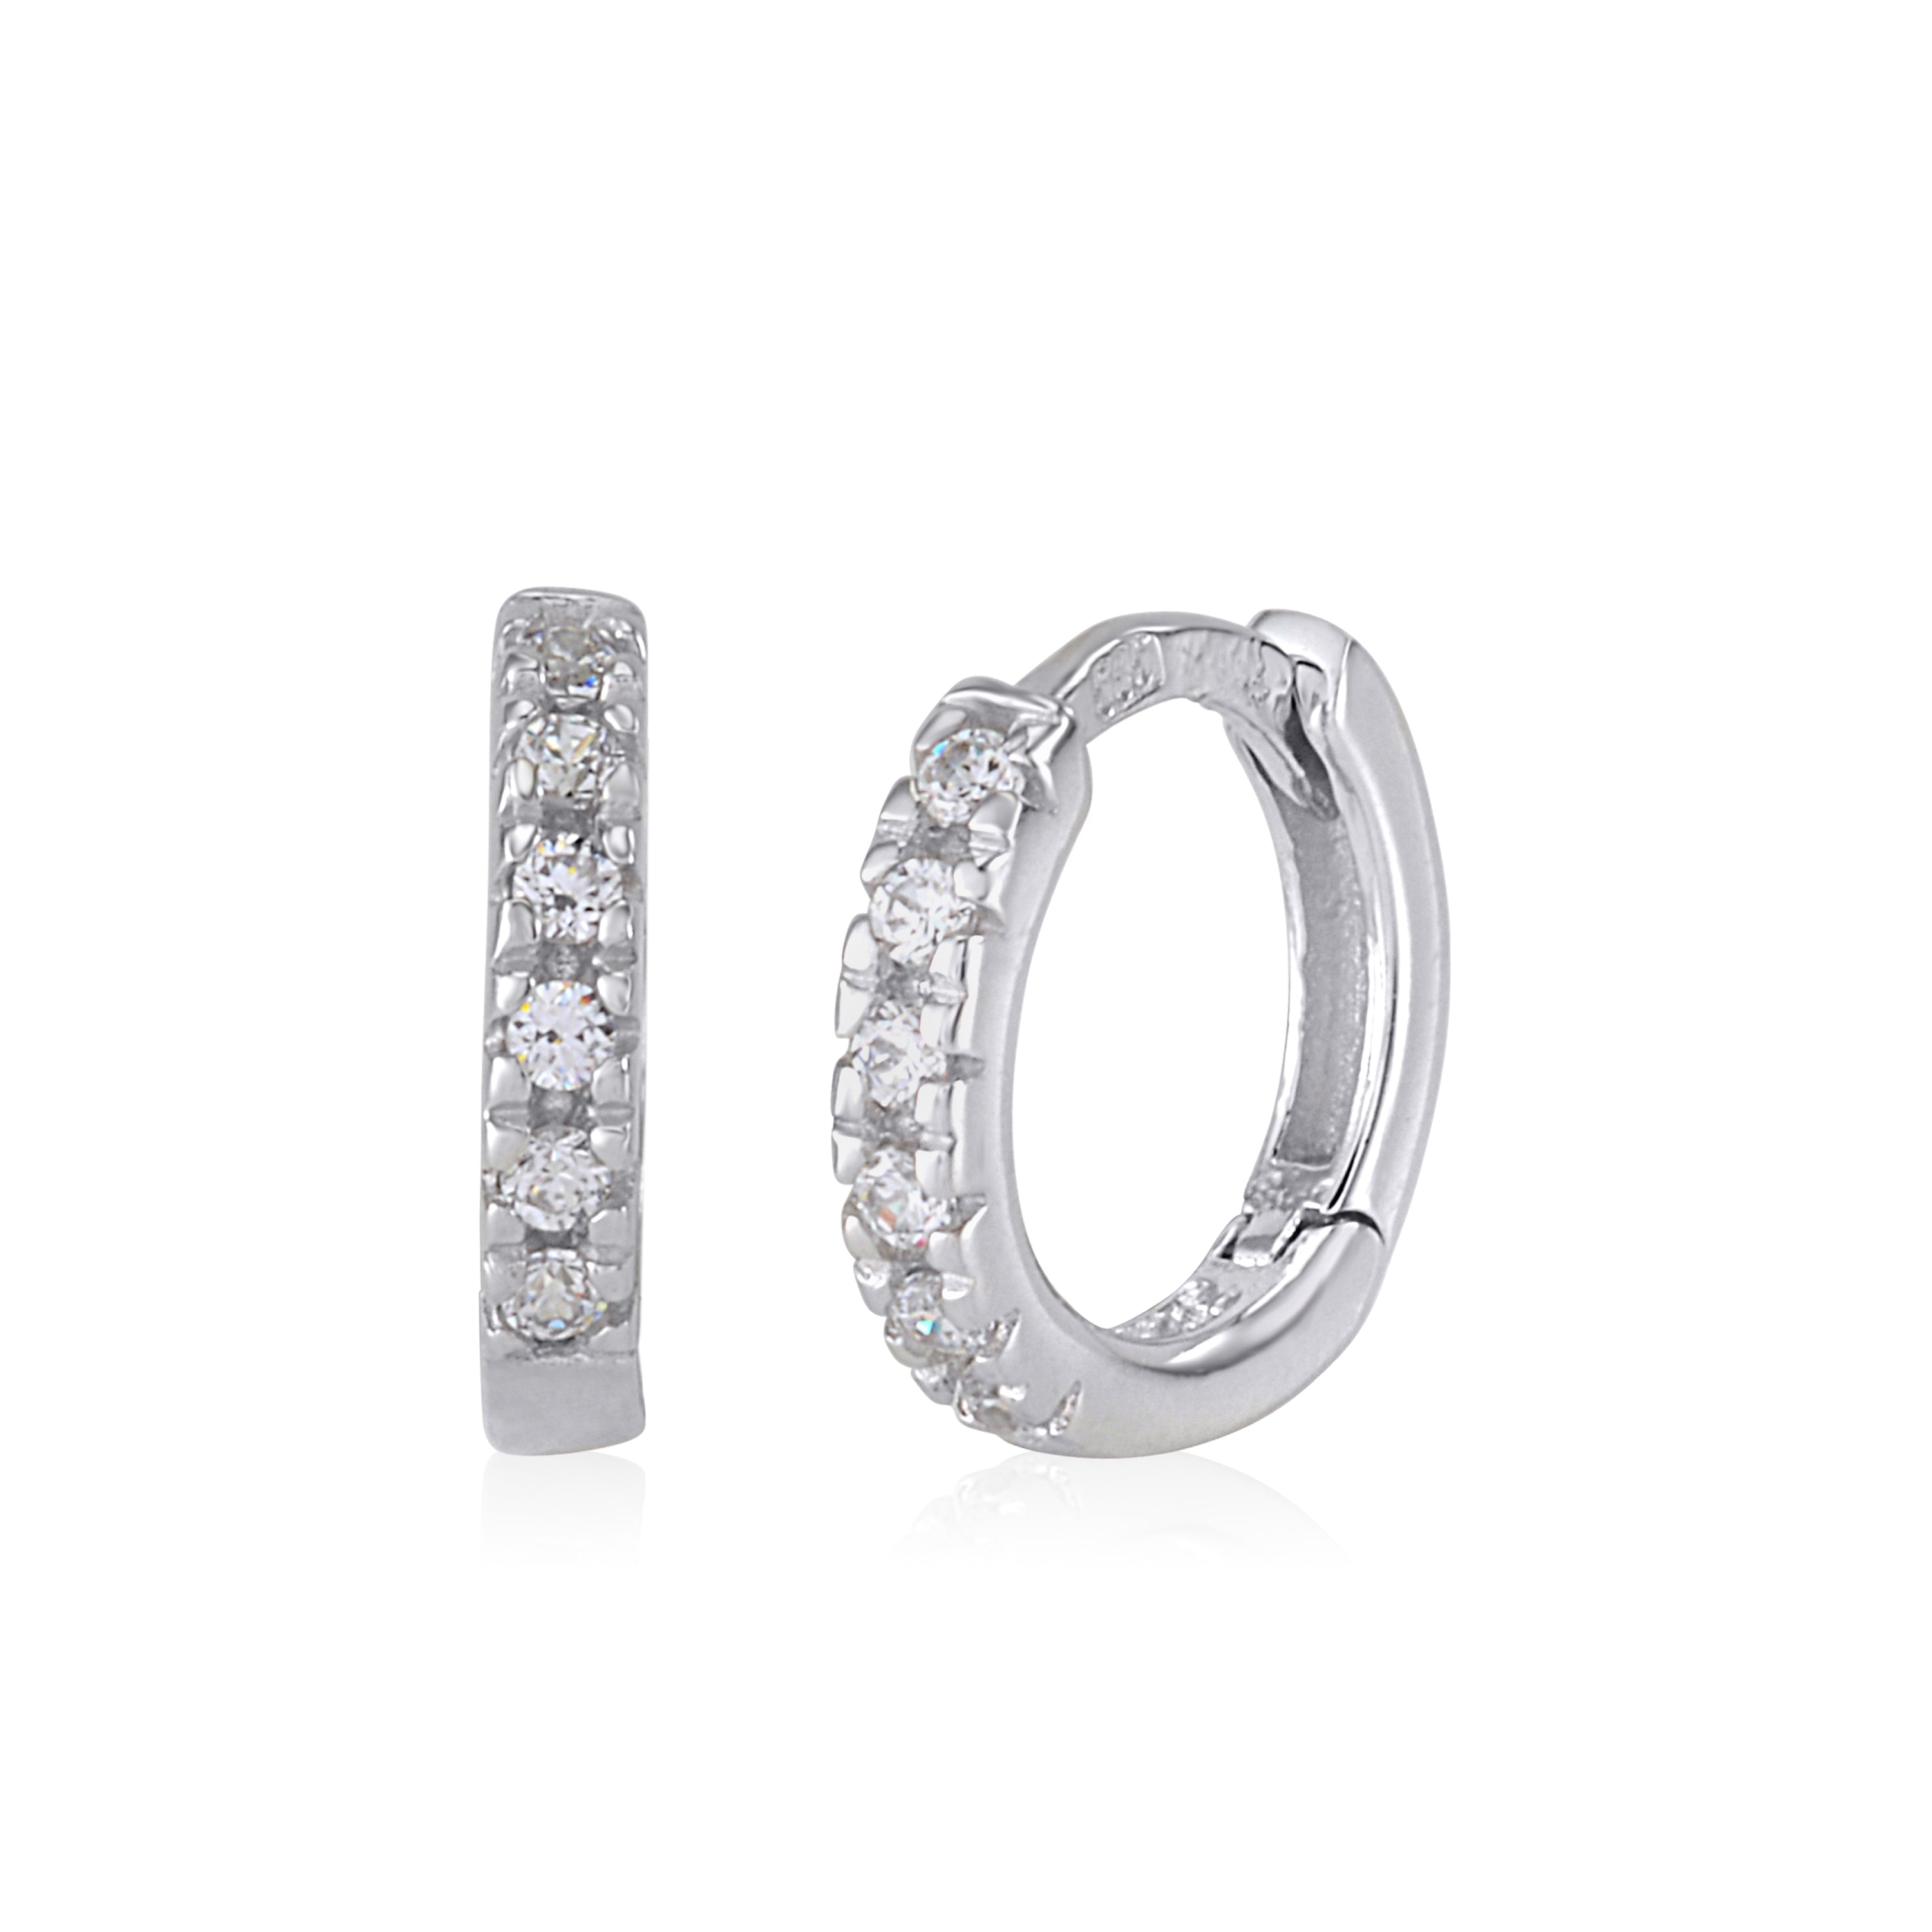 UNICORNJ 14K White Gold Round Hoop Huggie Earrings Small with CZ's 10mm Italy